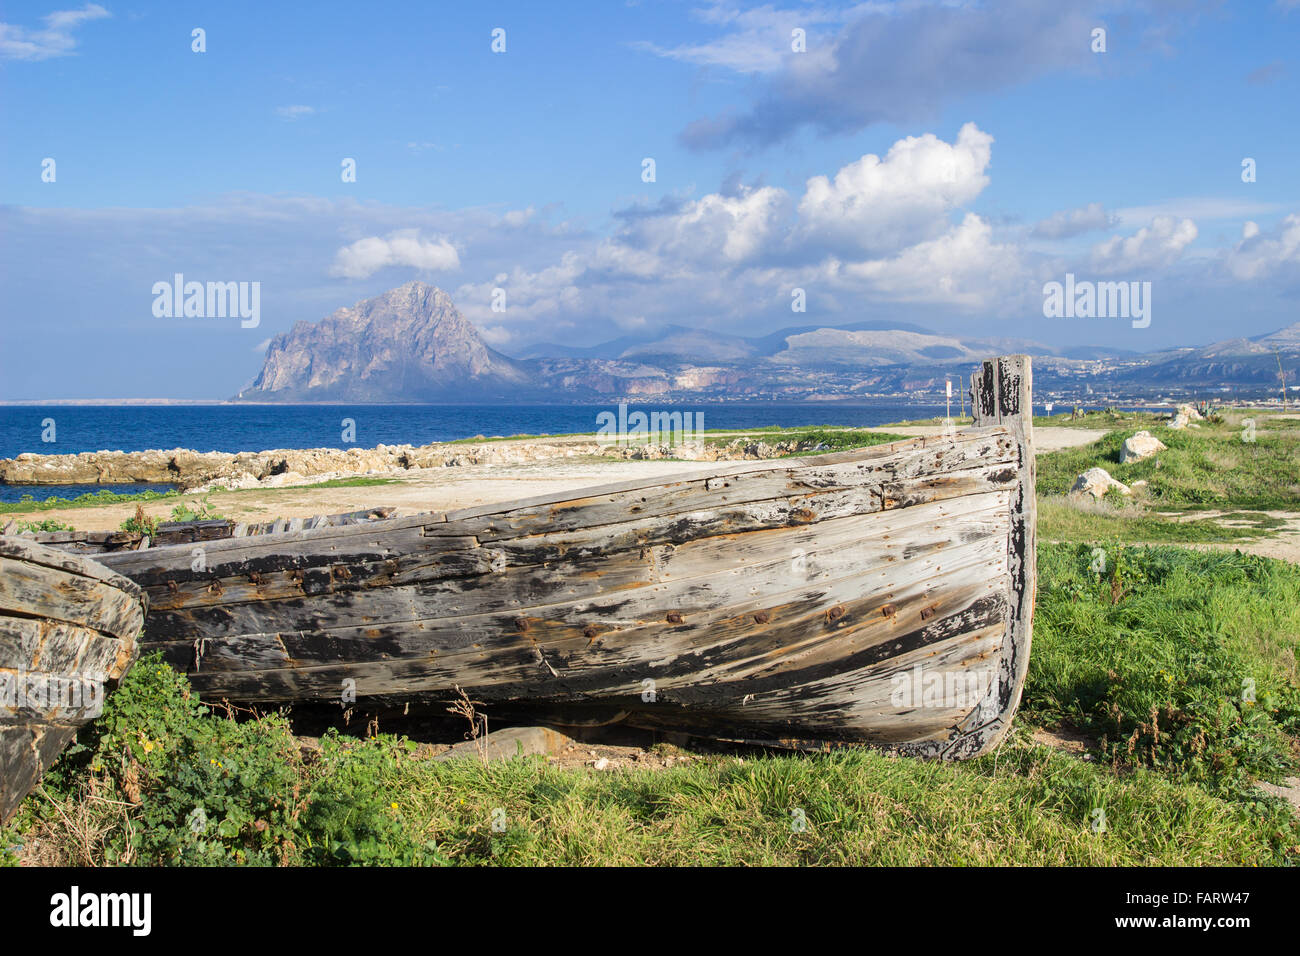 row boats sea mountain landscape coast old wooden clouds Stock Photo